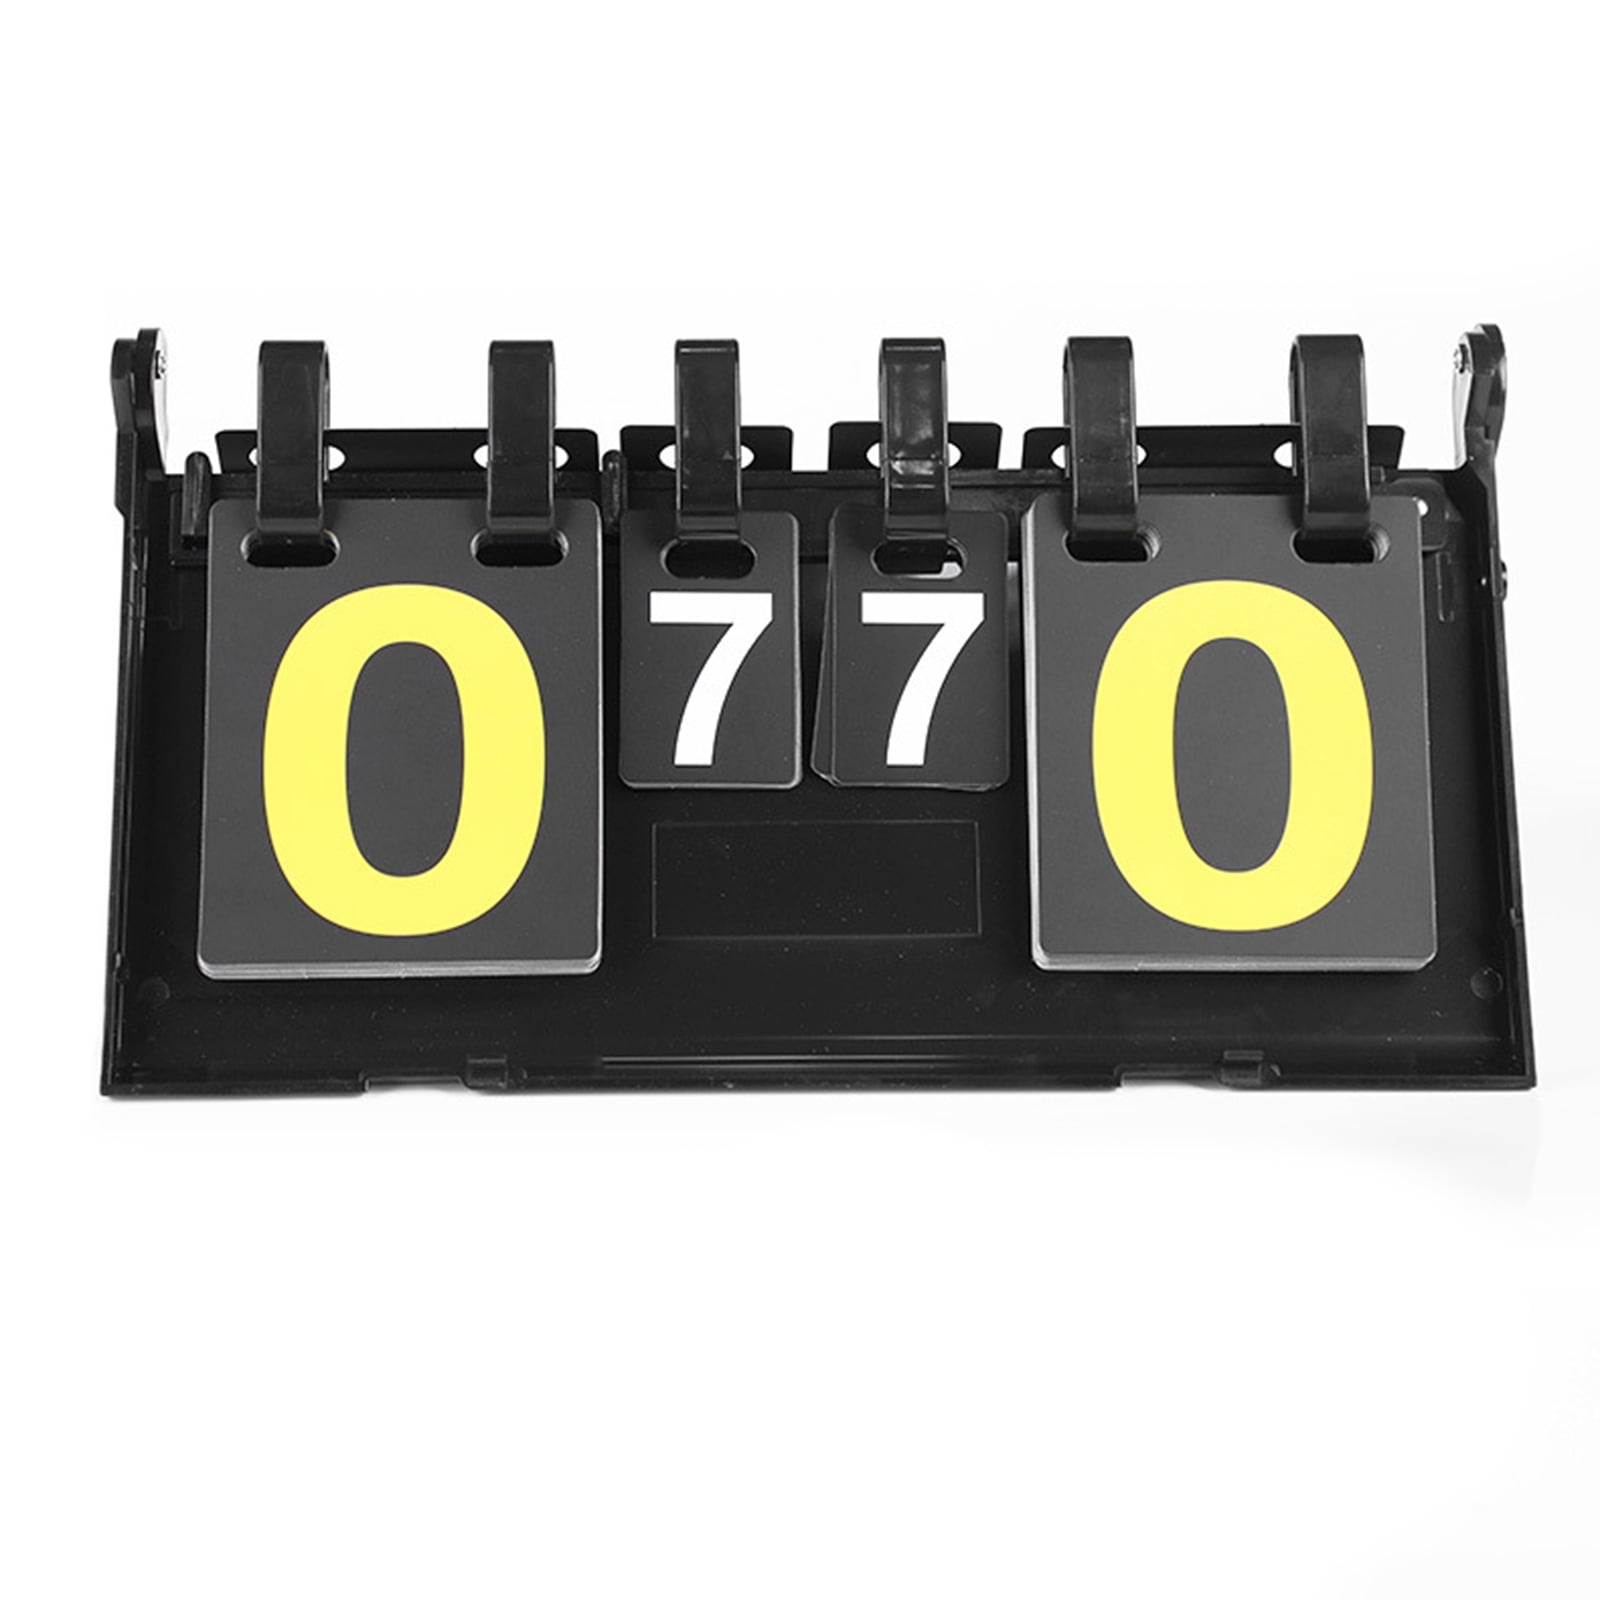 4-Digit Score Board Tennis Scoreboard Scorer ABS Flop Suitable For Ball Games Black Basketball Football Volleyball Table